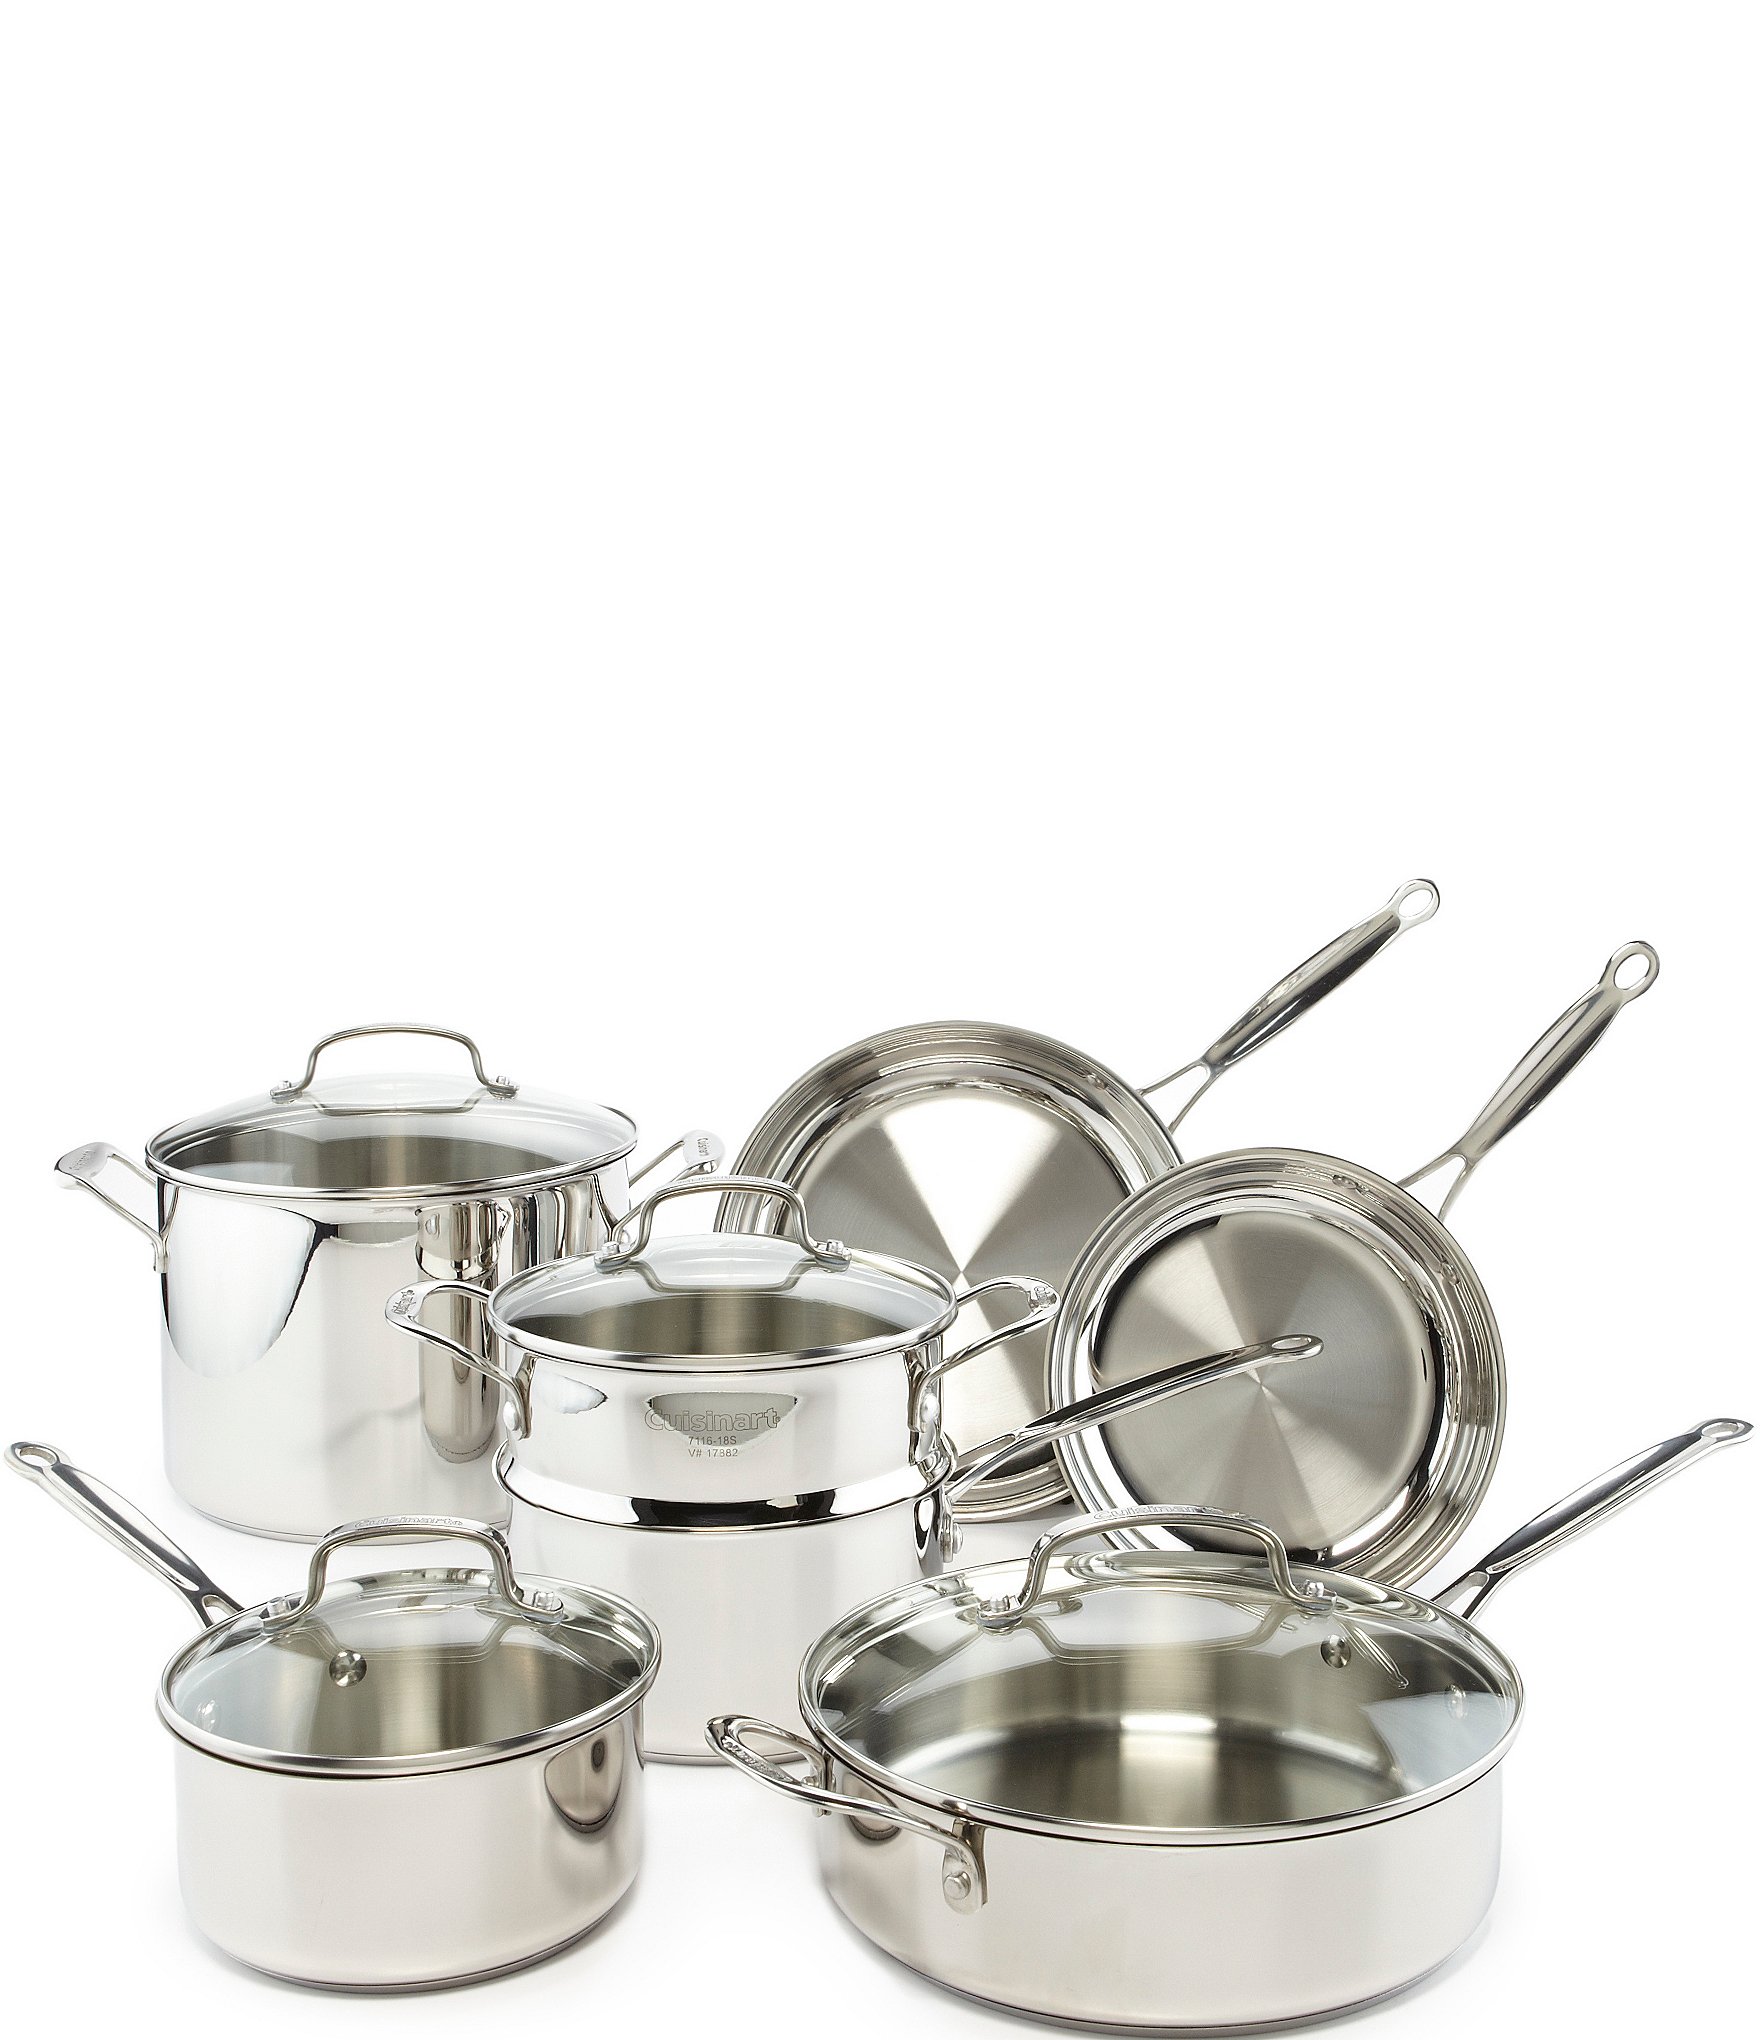 Cuisinart Chef's Classic Stainless Steel 11-Piece Cookware Set | Dillards Cuisinart Chef's Classic 11 Piece Stainless Steel Cookware Set